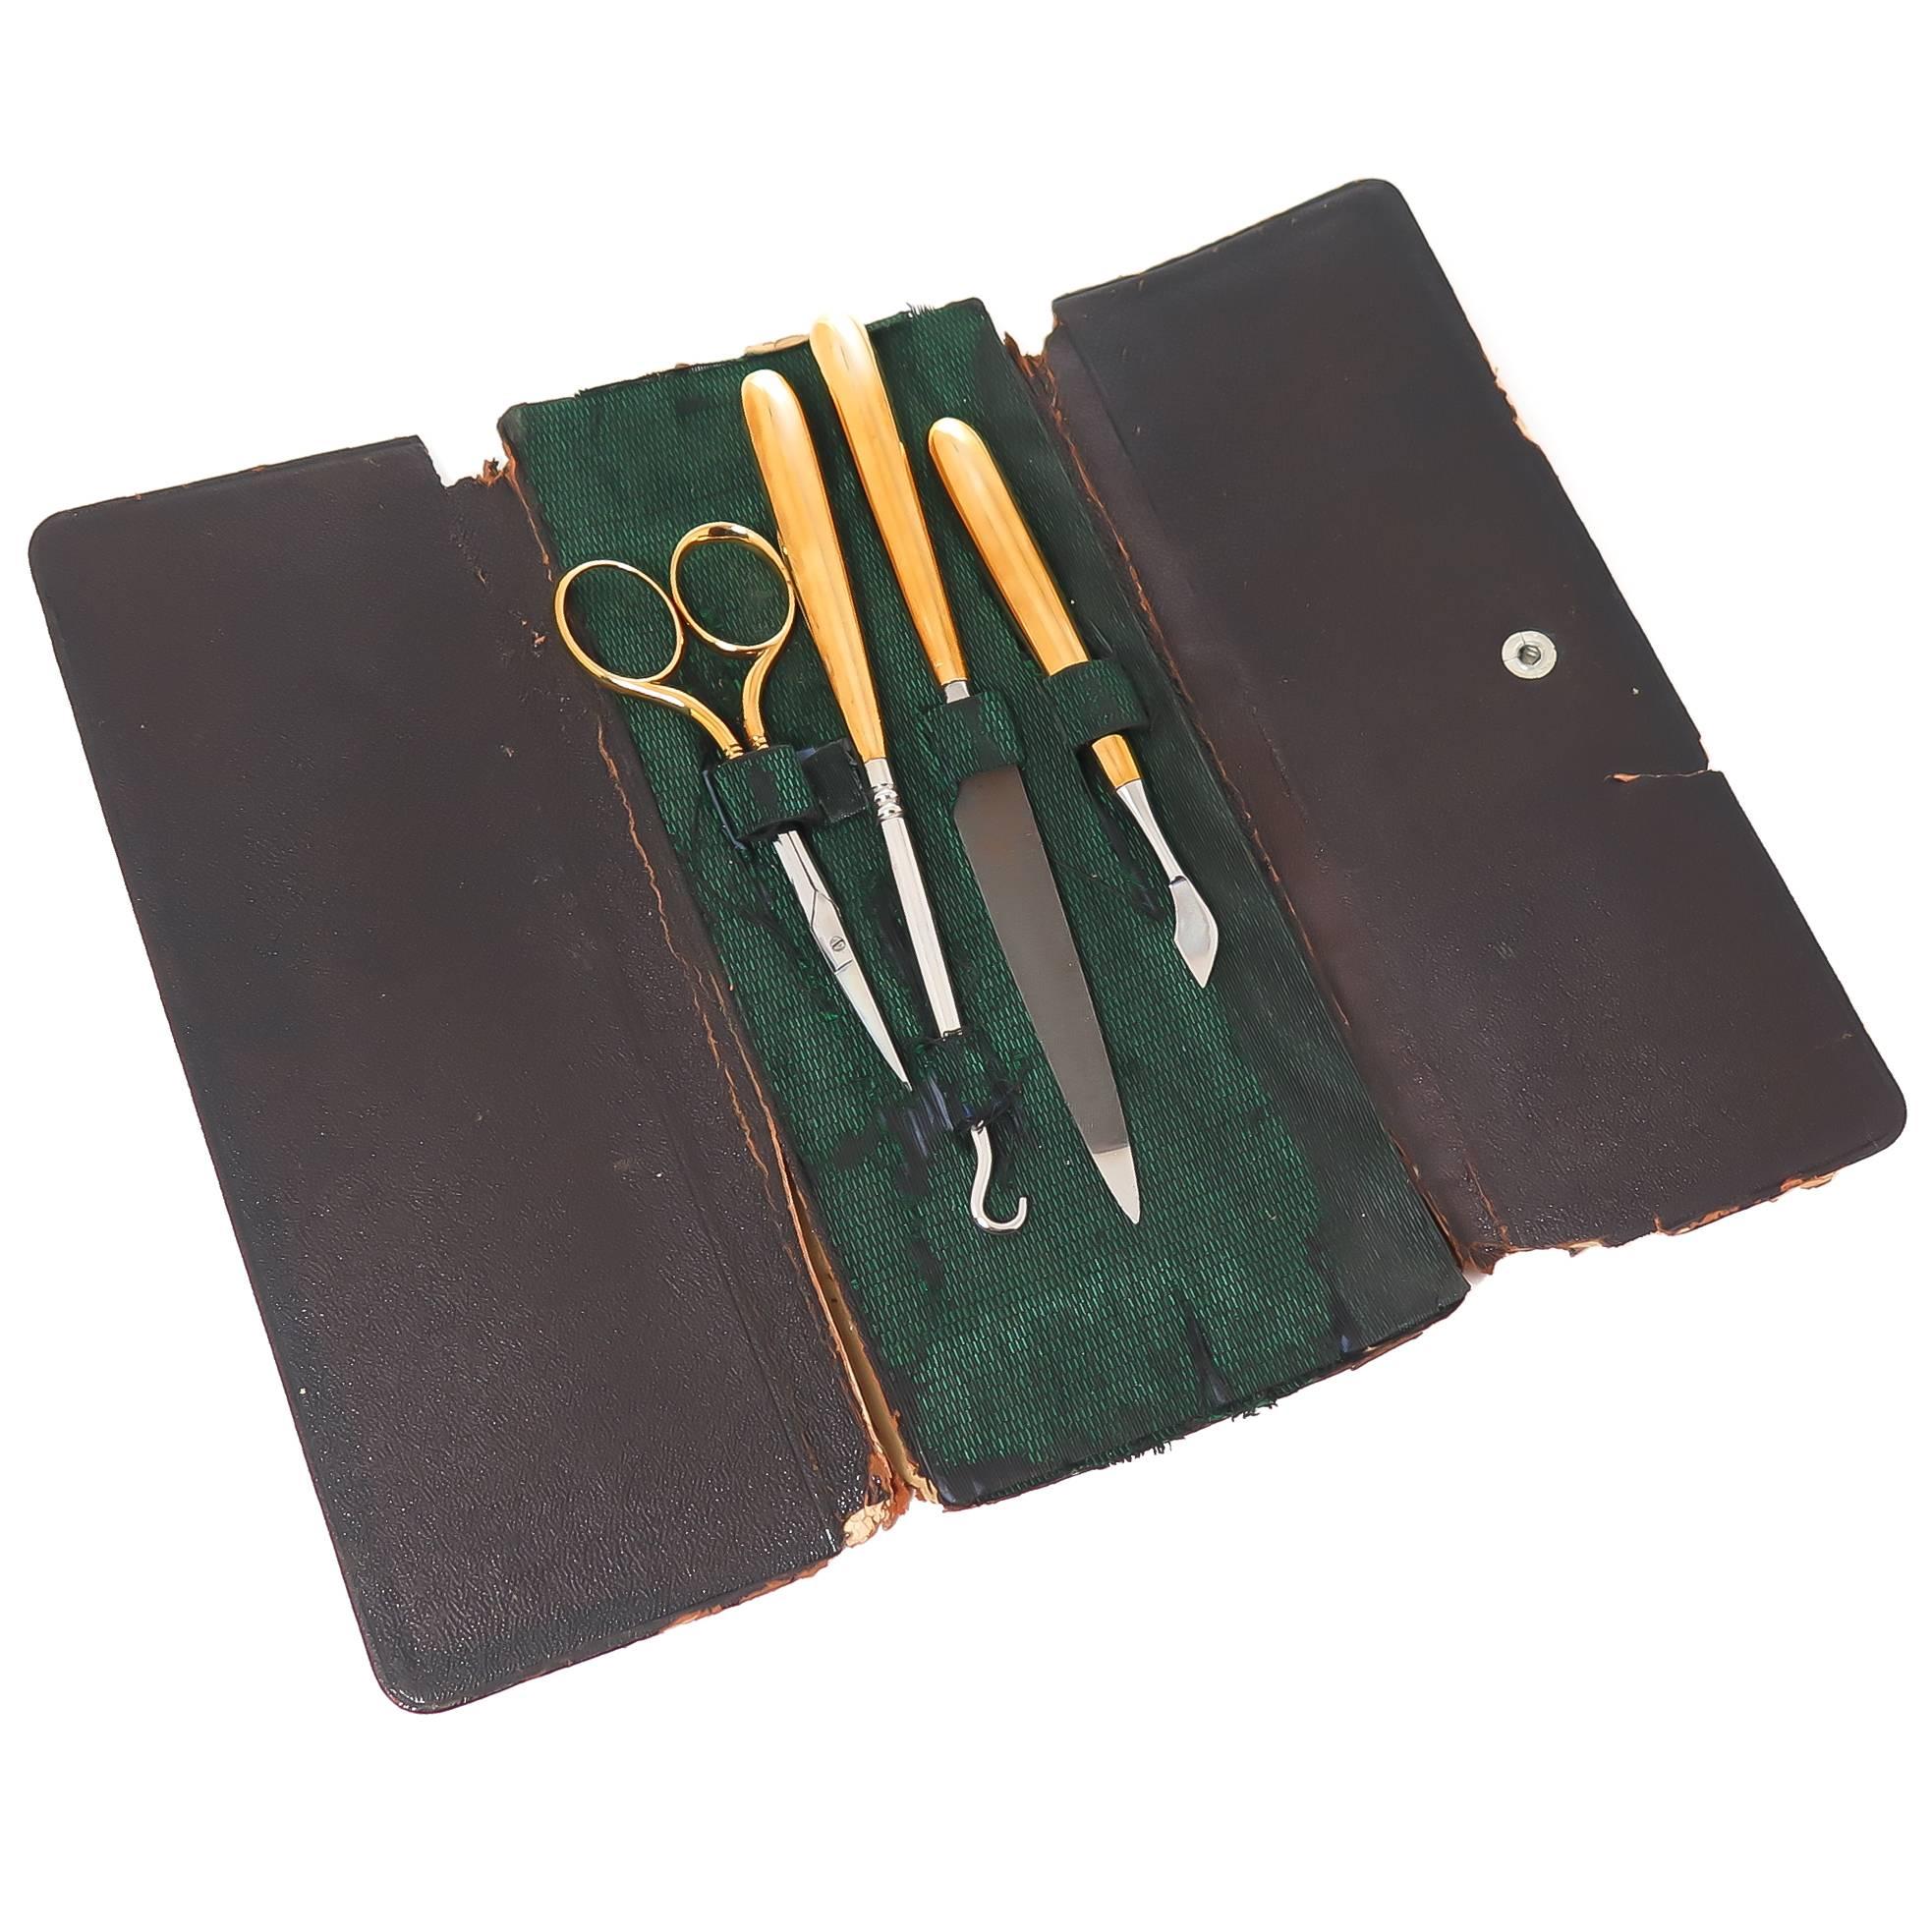 Circa 1915 14K Yellow Gold Manicure set by Gorham, this excellent condition almost unused set includes scissors, cuticle tool, nail file and button hook. each piece measuring 4 1/4 to 6 5/8 inch in length and each piece is numbered and has the